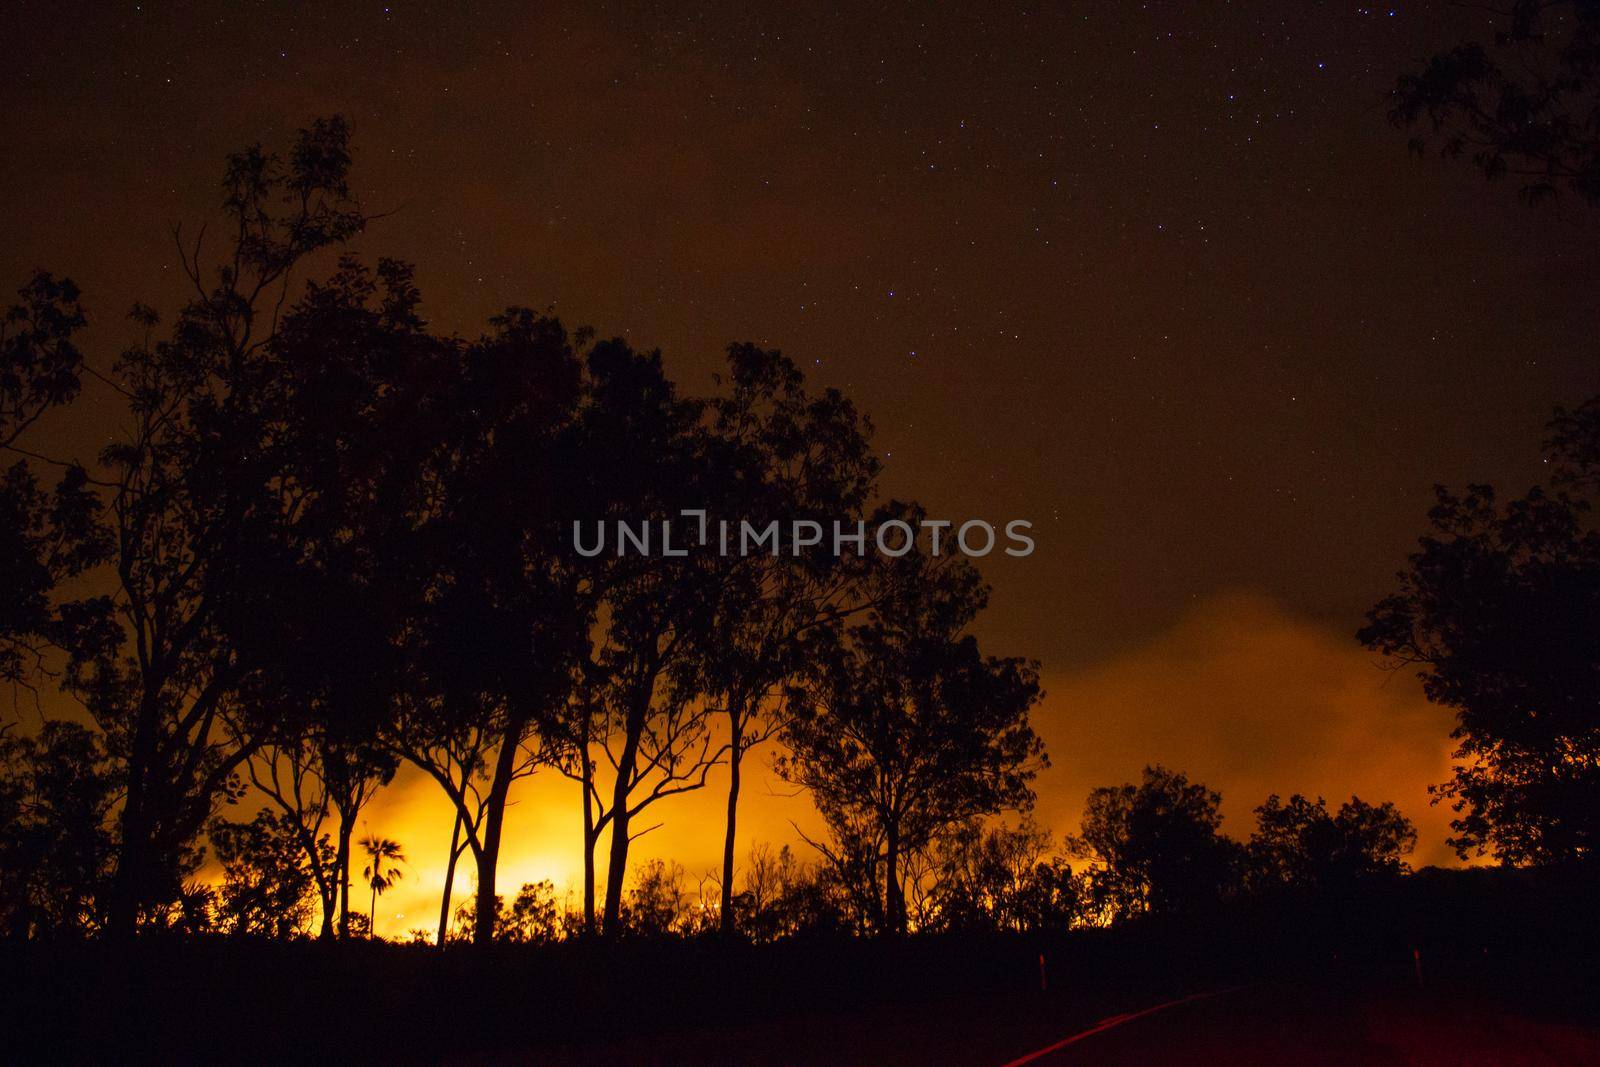 a bushfire, forest is really bright because of the fire, litchfield national park, australia by bettercallcurry